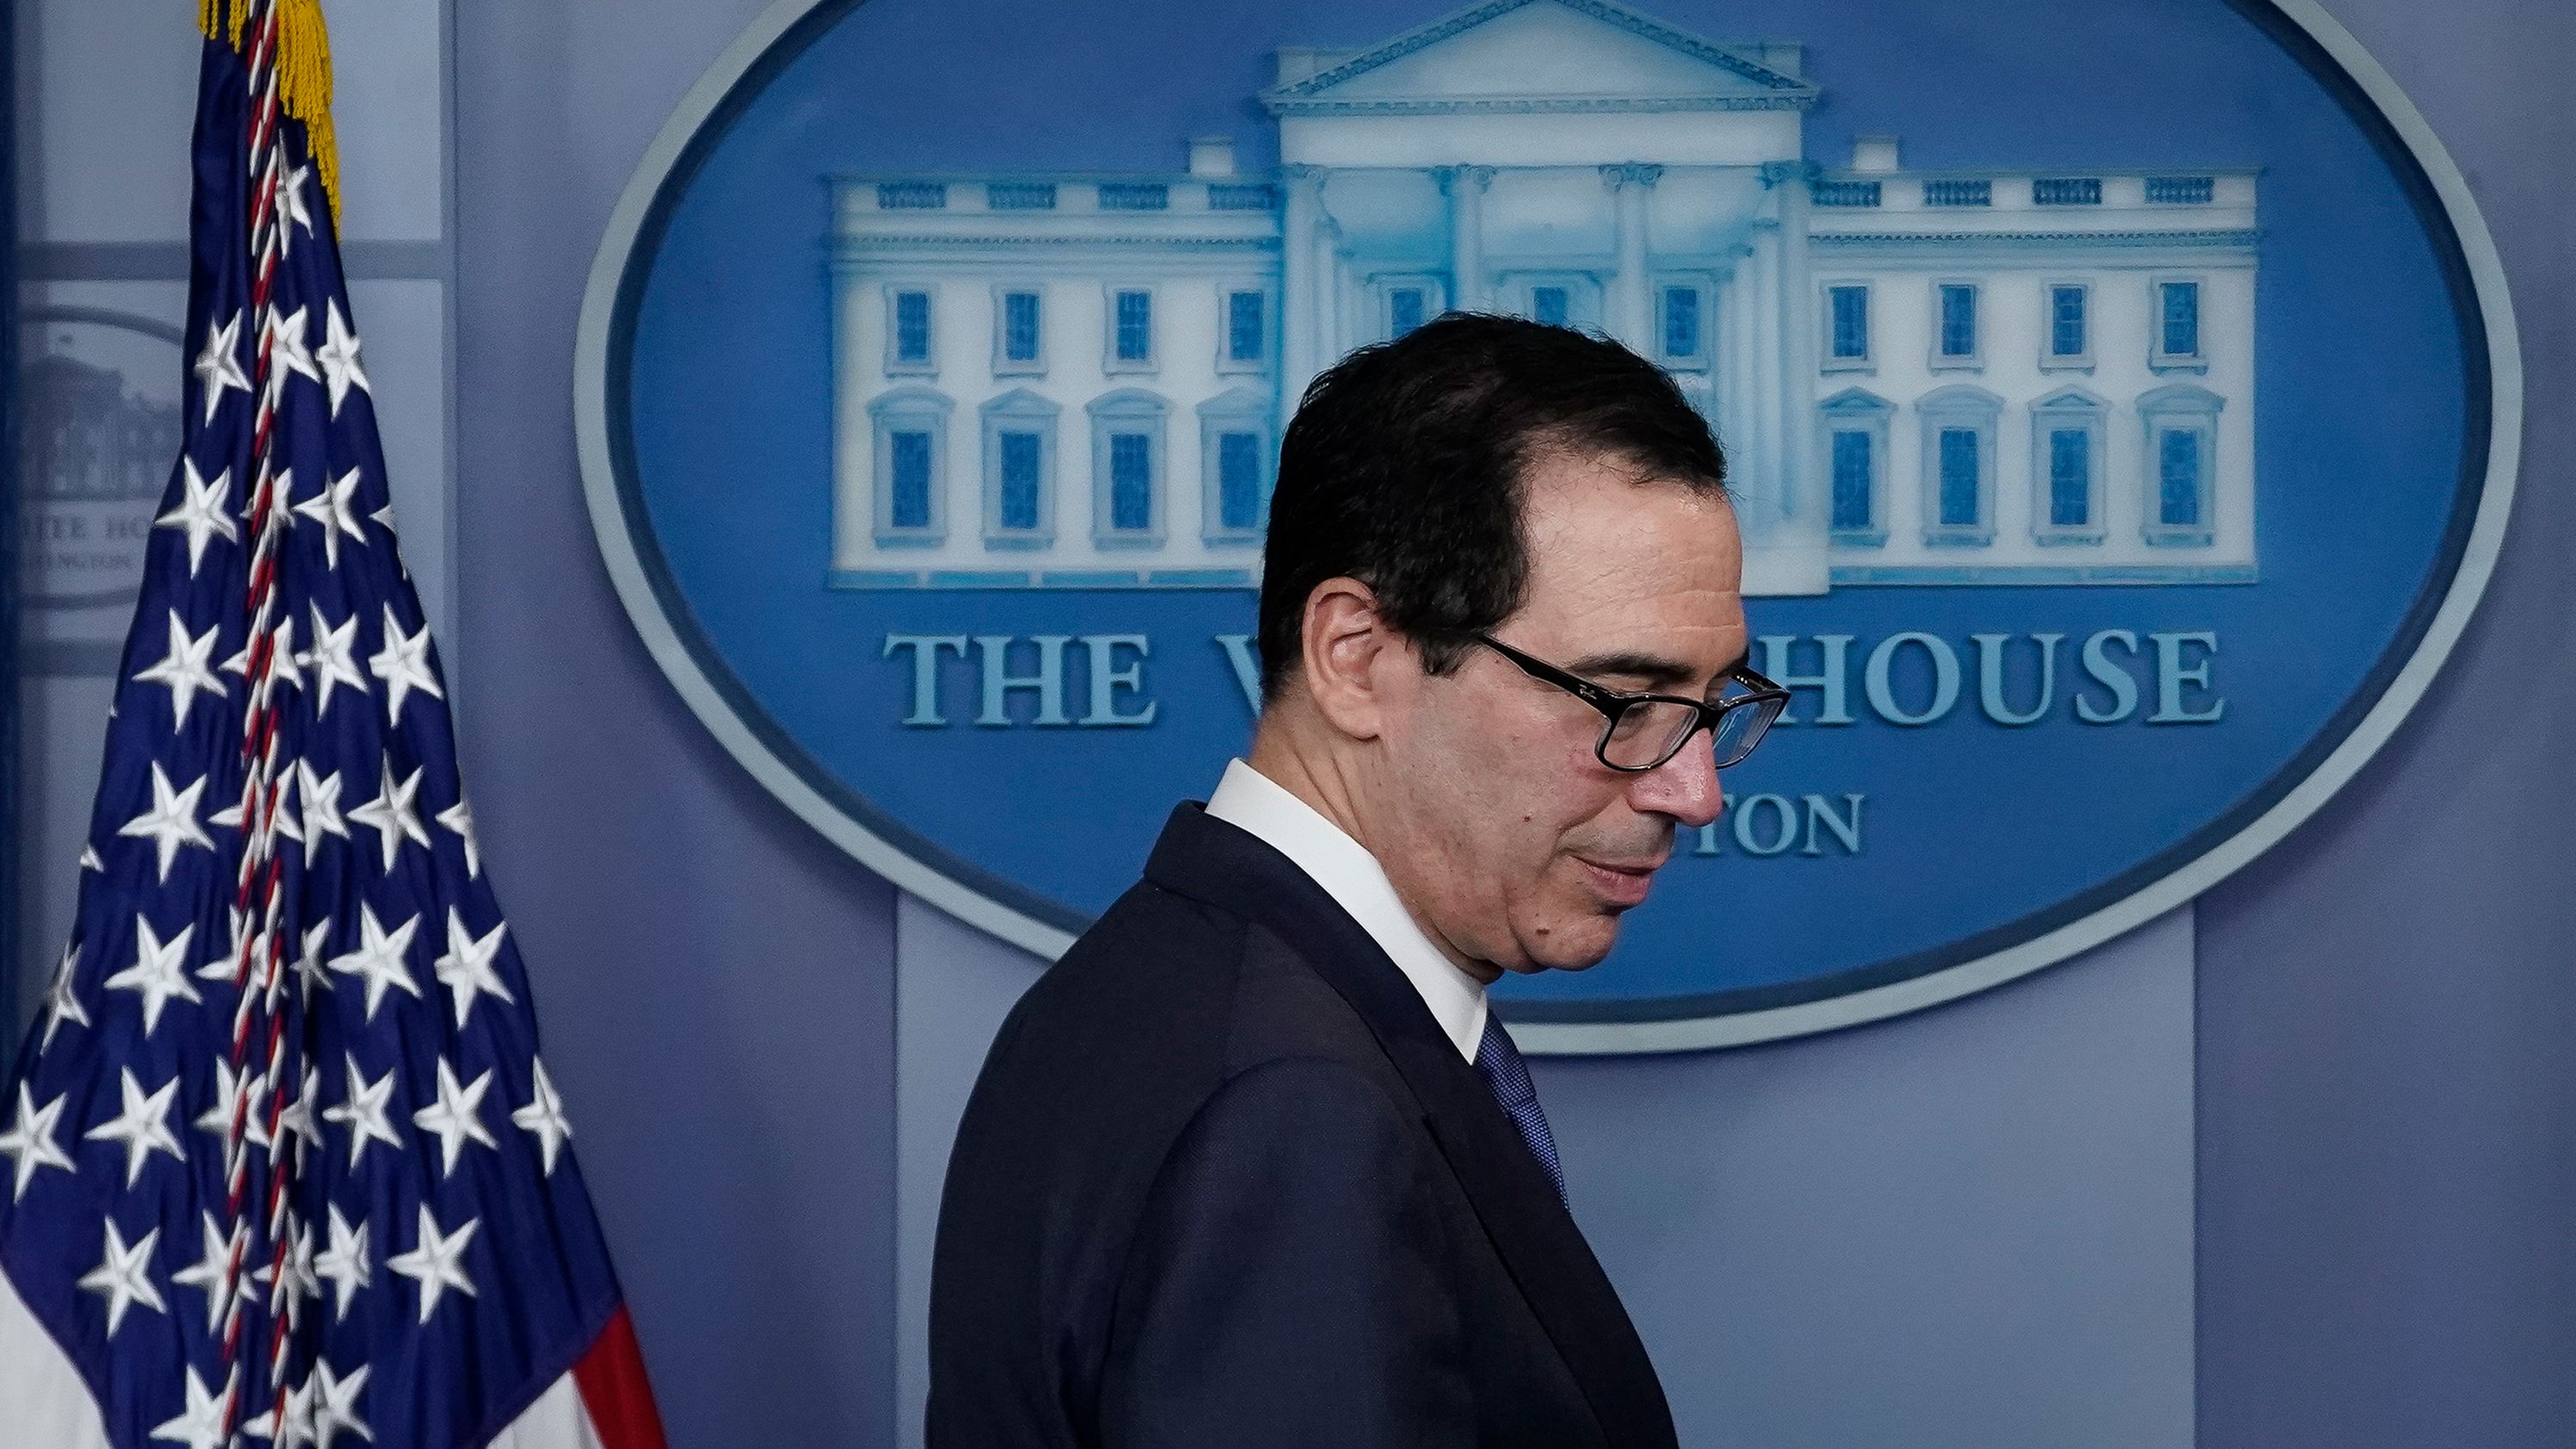 Treasury Secretary Steven Mnuchin arrives for a briefing on the coronavirus pandemic, in the press briefing room of the White House on March 25, 2020. (Photo by Drew Angerer/Getty Images)